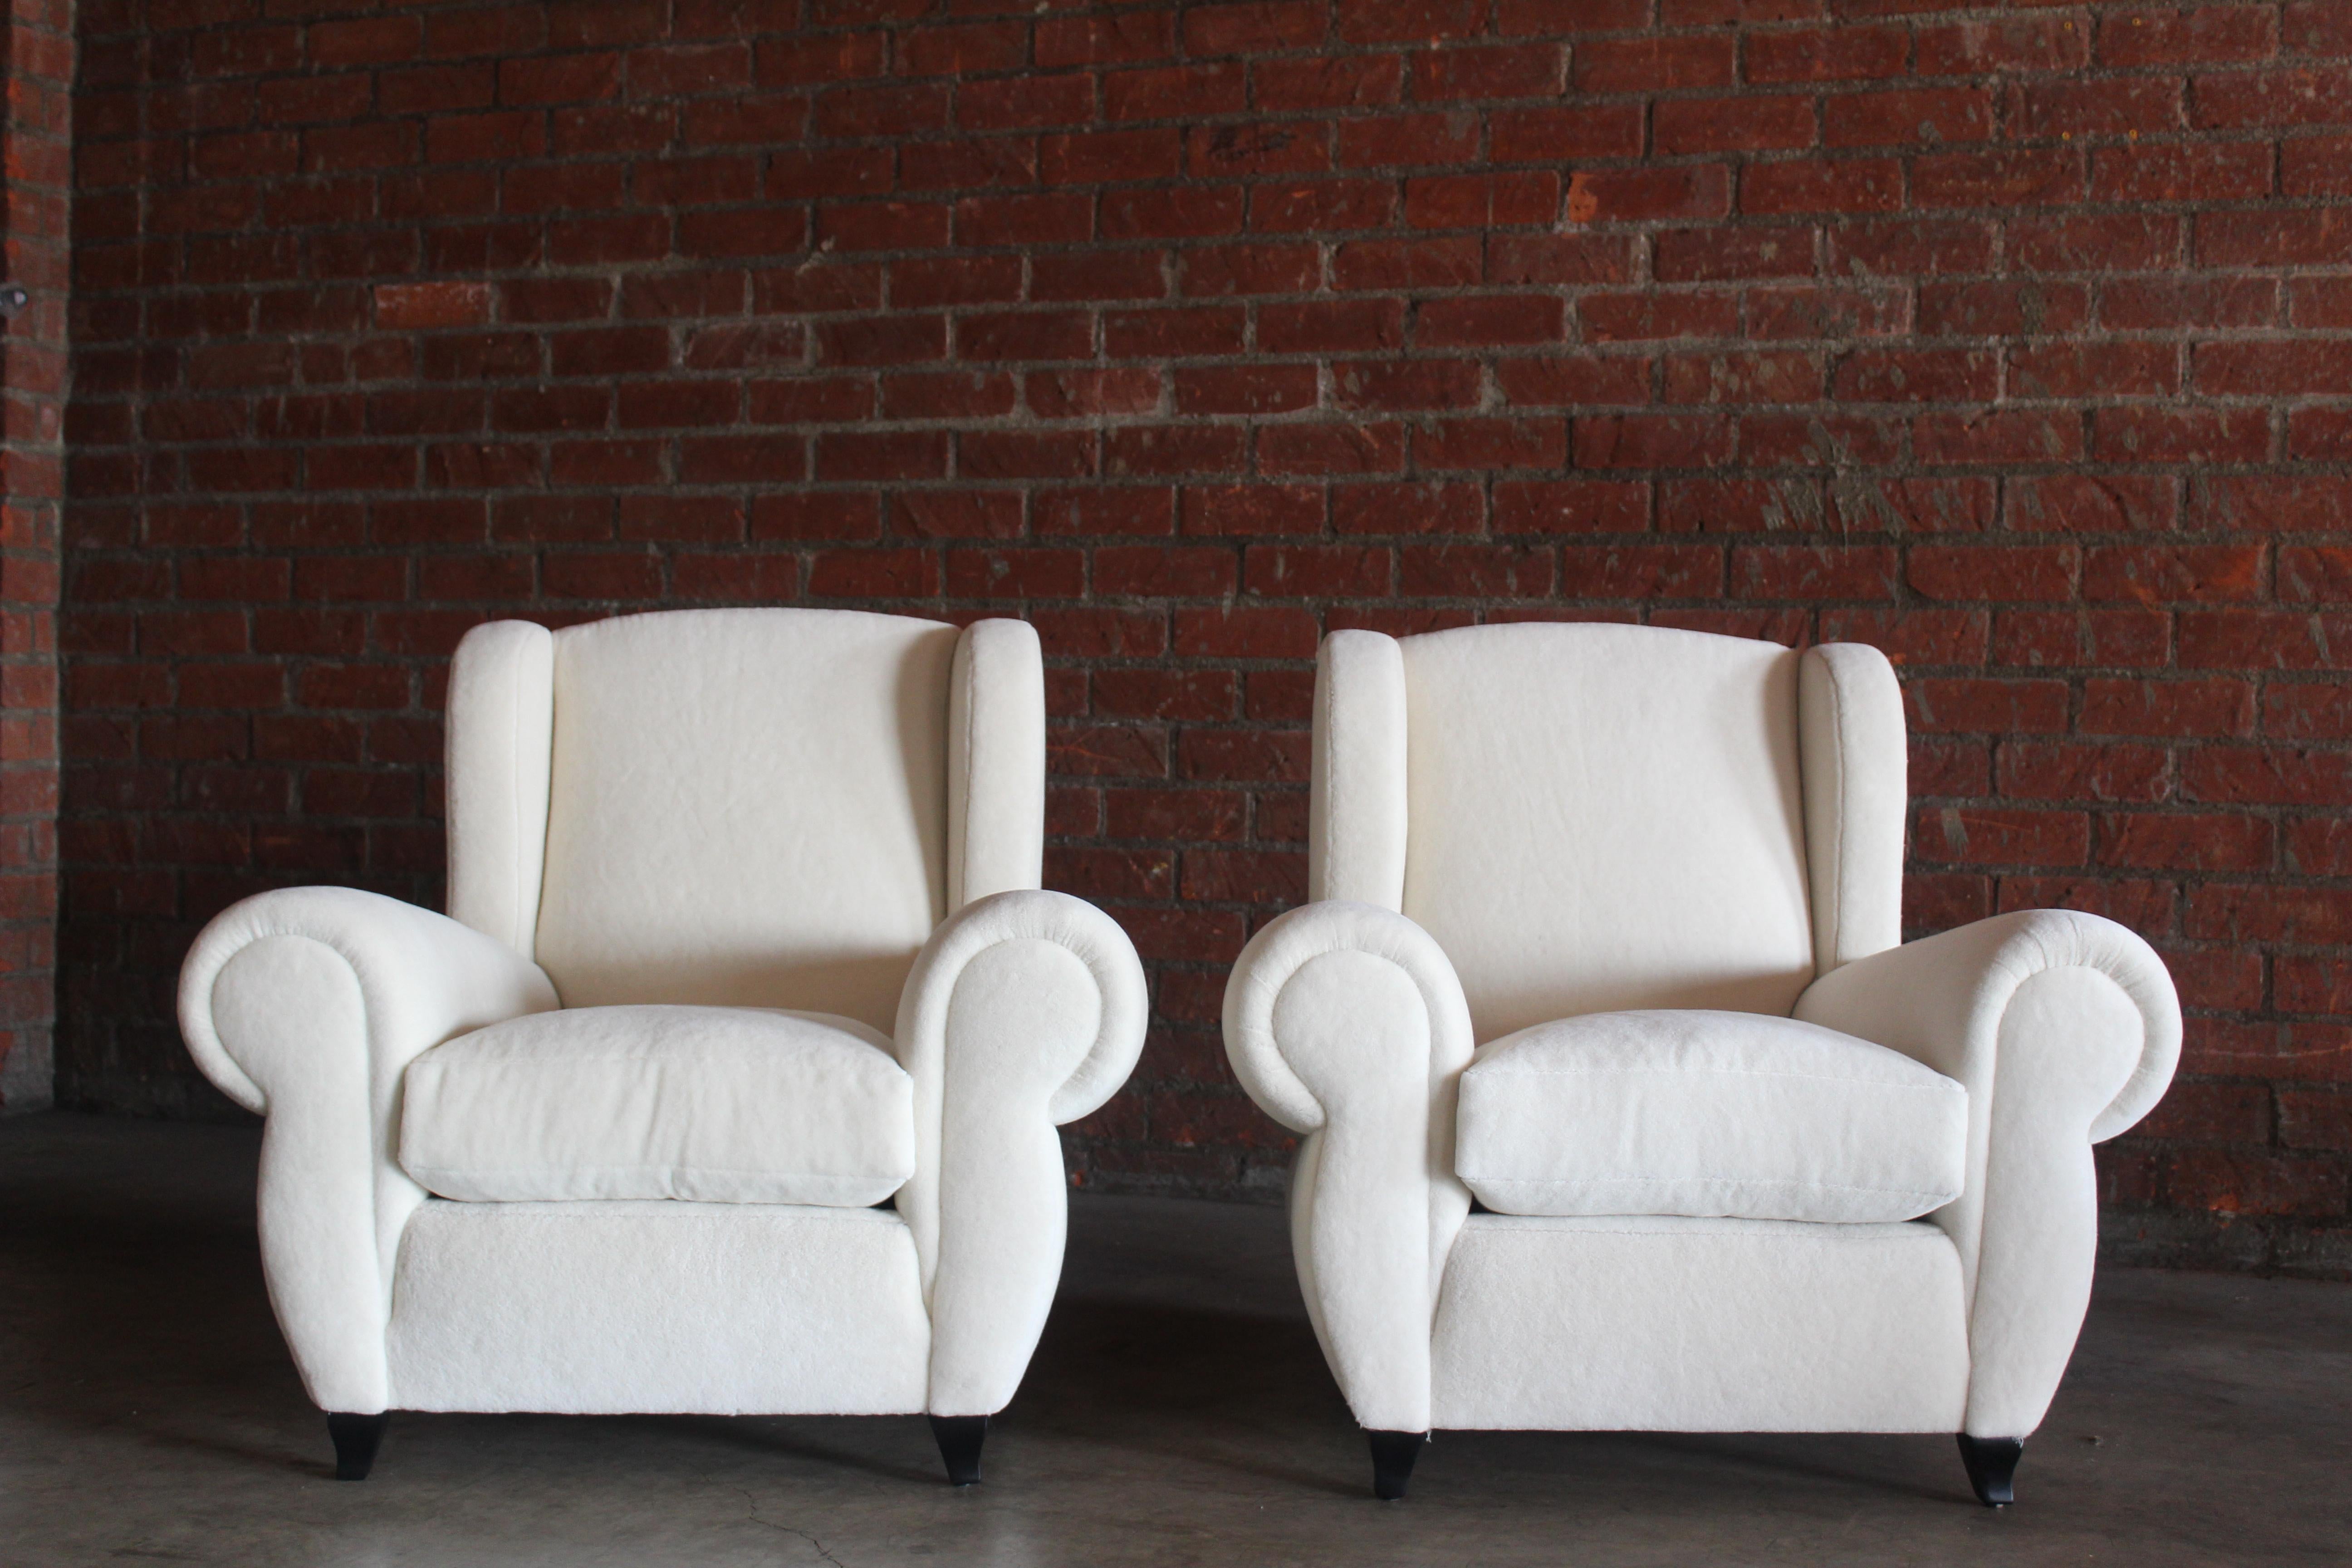 Pair of 1930s Maurice Rinck Style Art Deco French Club Chairs in Alpaca Wool For Sale 2